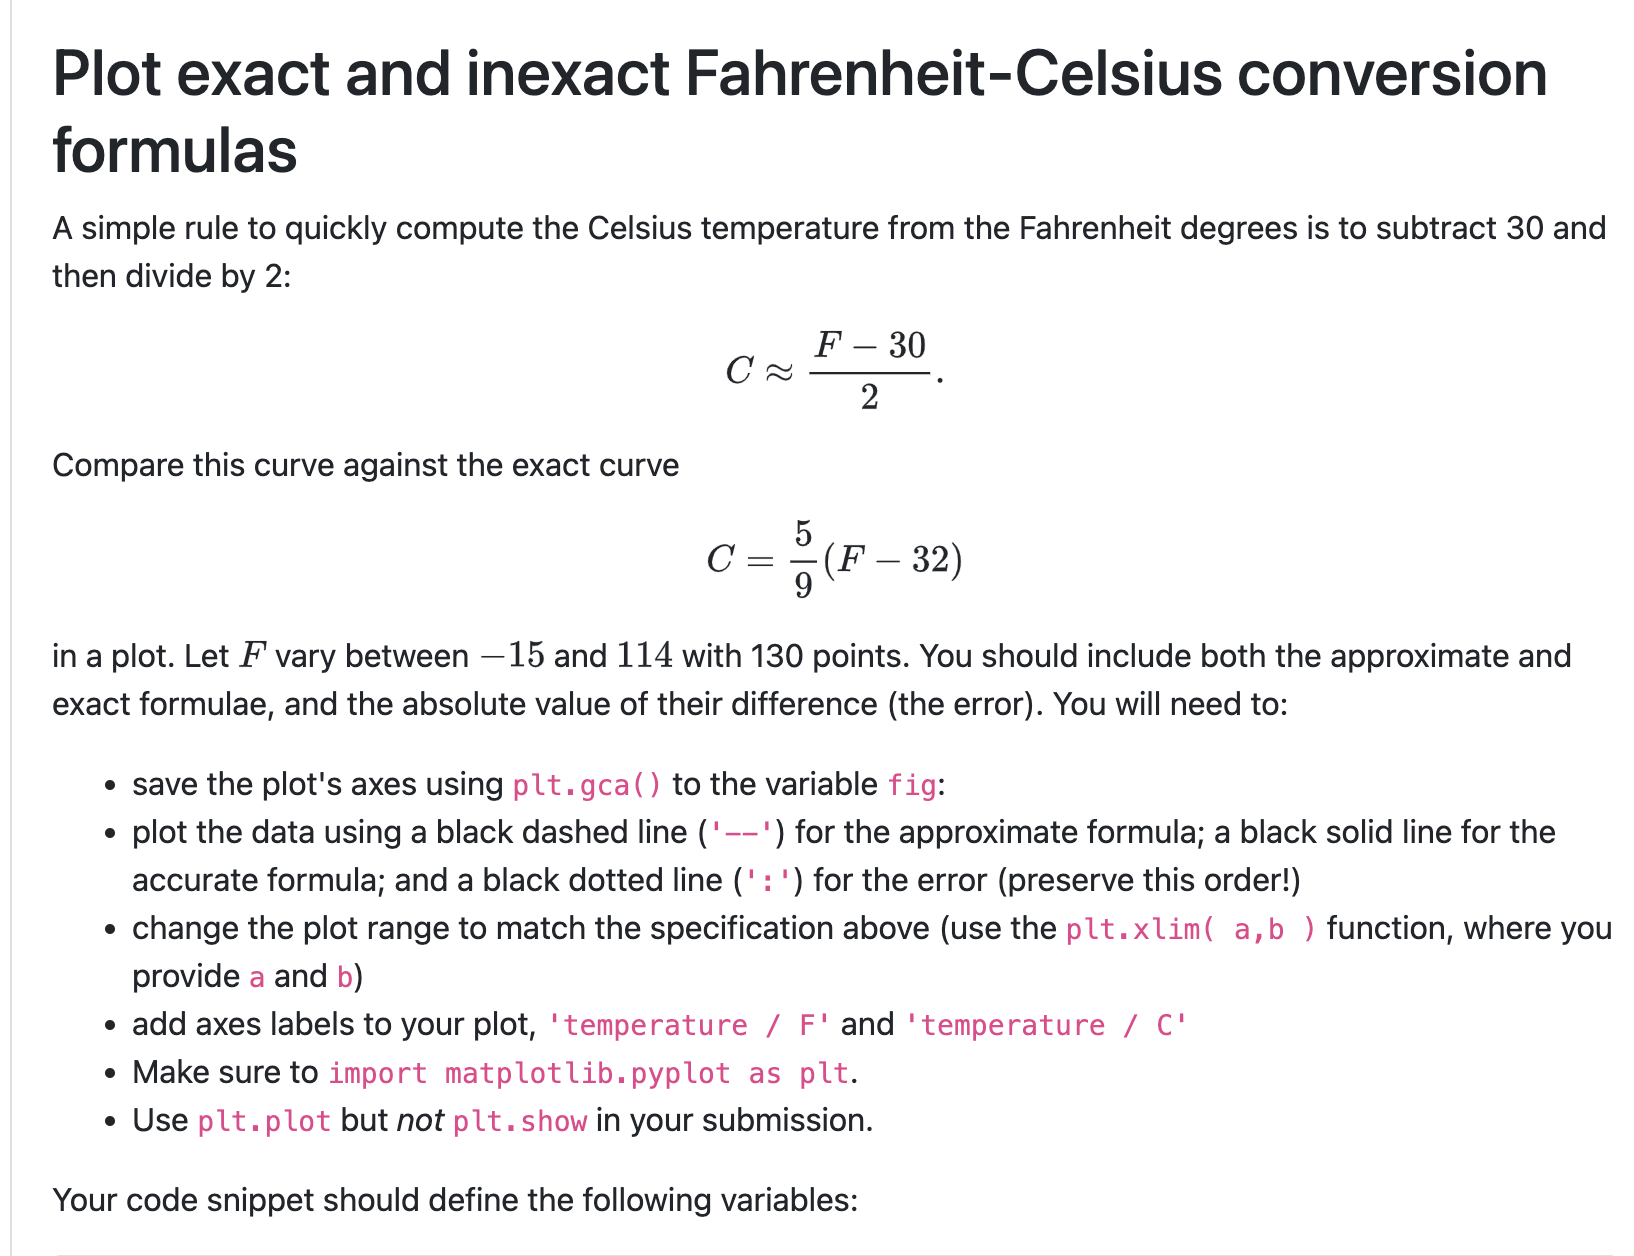 This hack helps convert Fahrenheit to Celsius without math